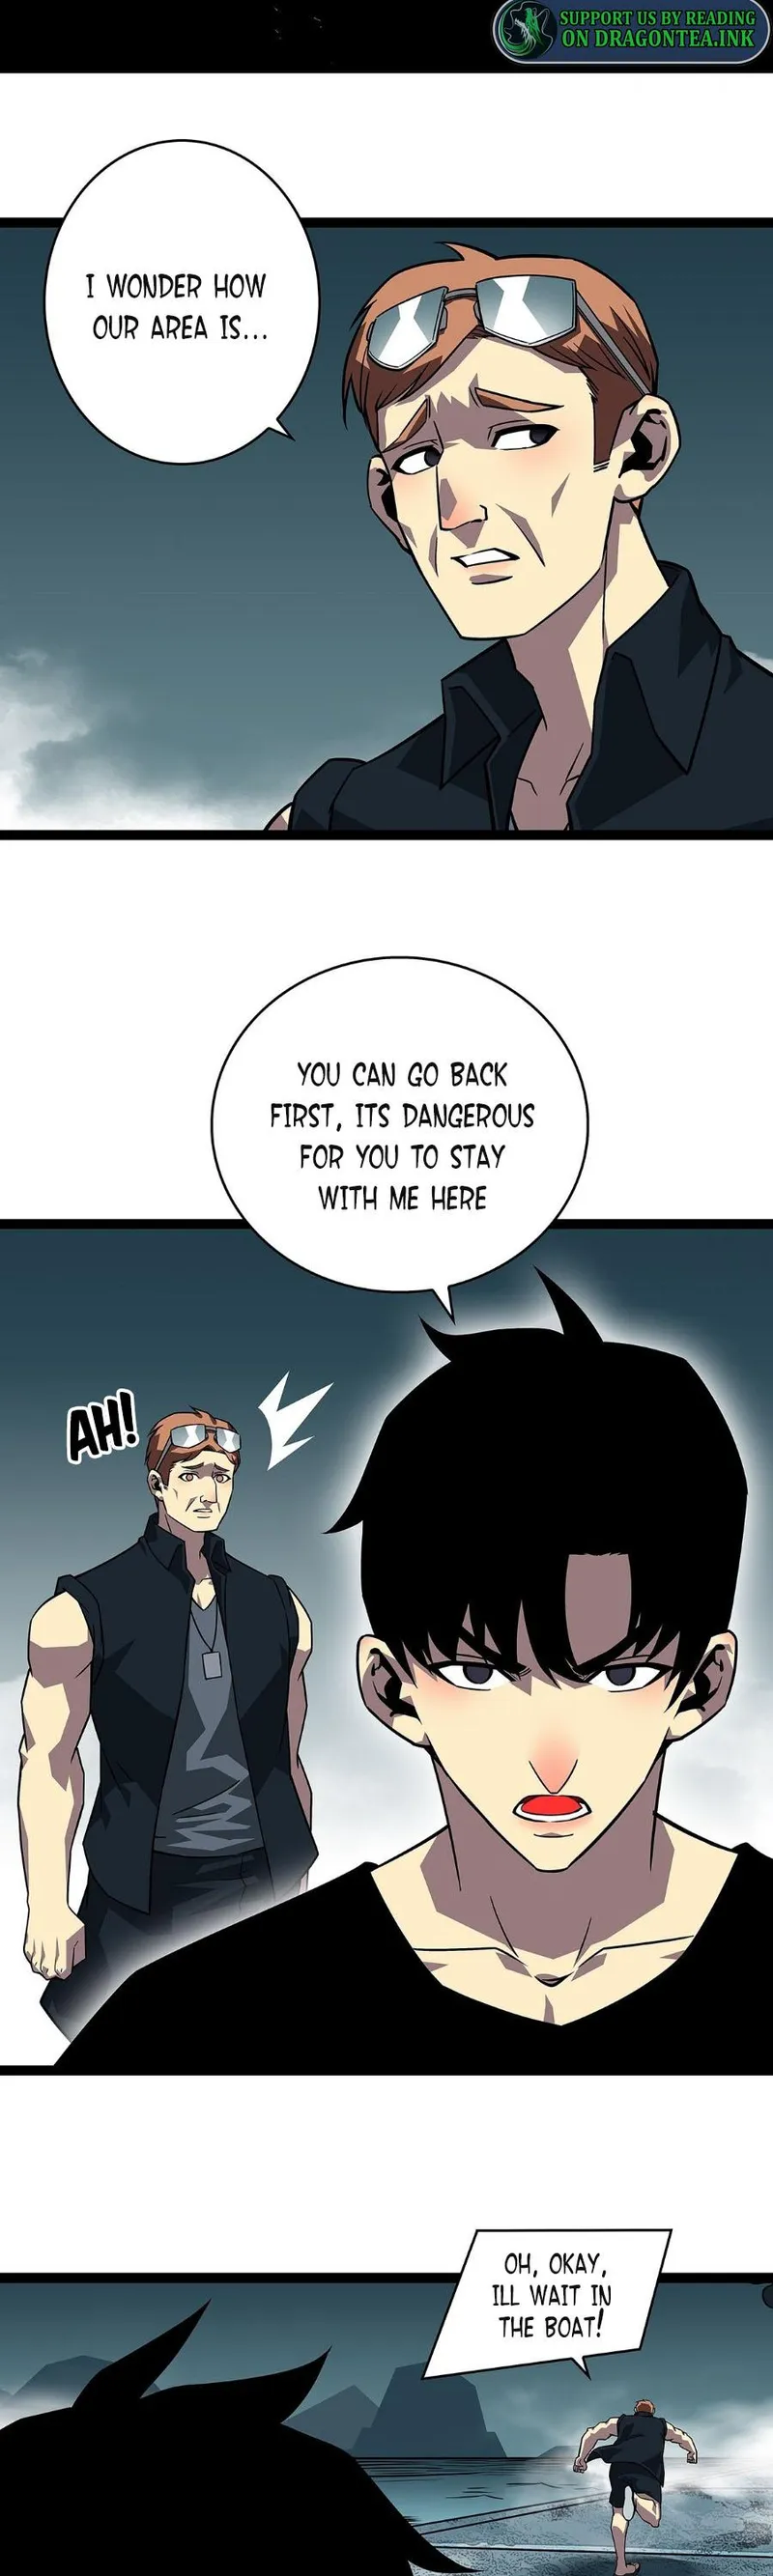 Manhua] It All Starts With Playing Game Seriously - Capítulo 1 - Prólogo  (PT-BR) 